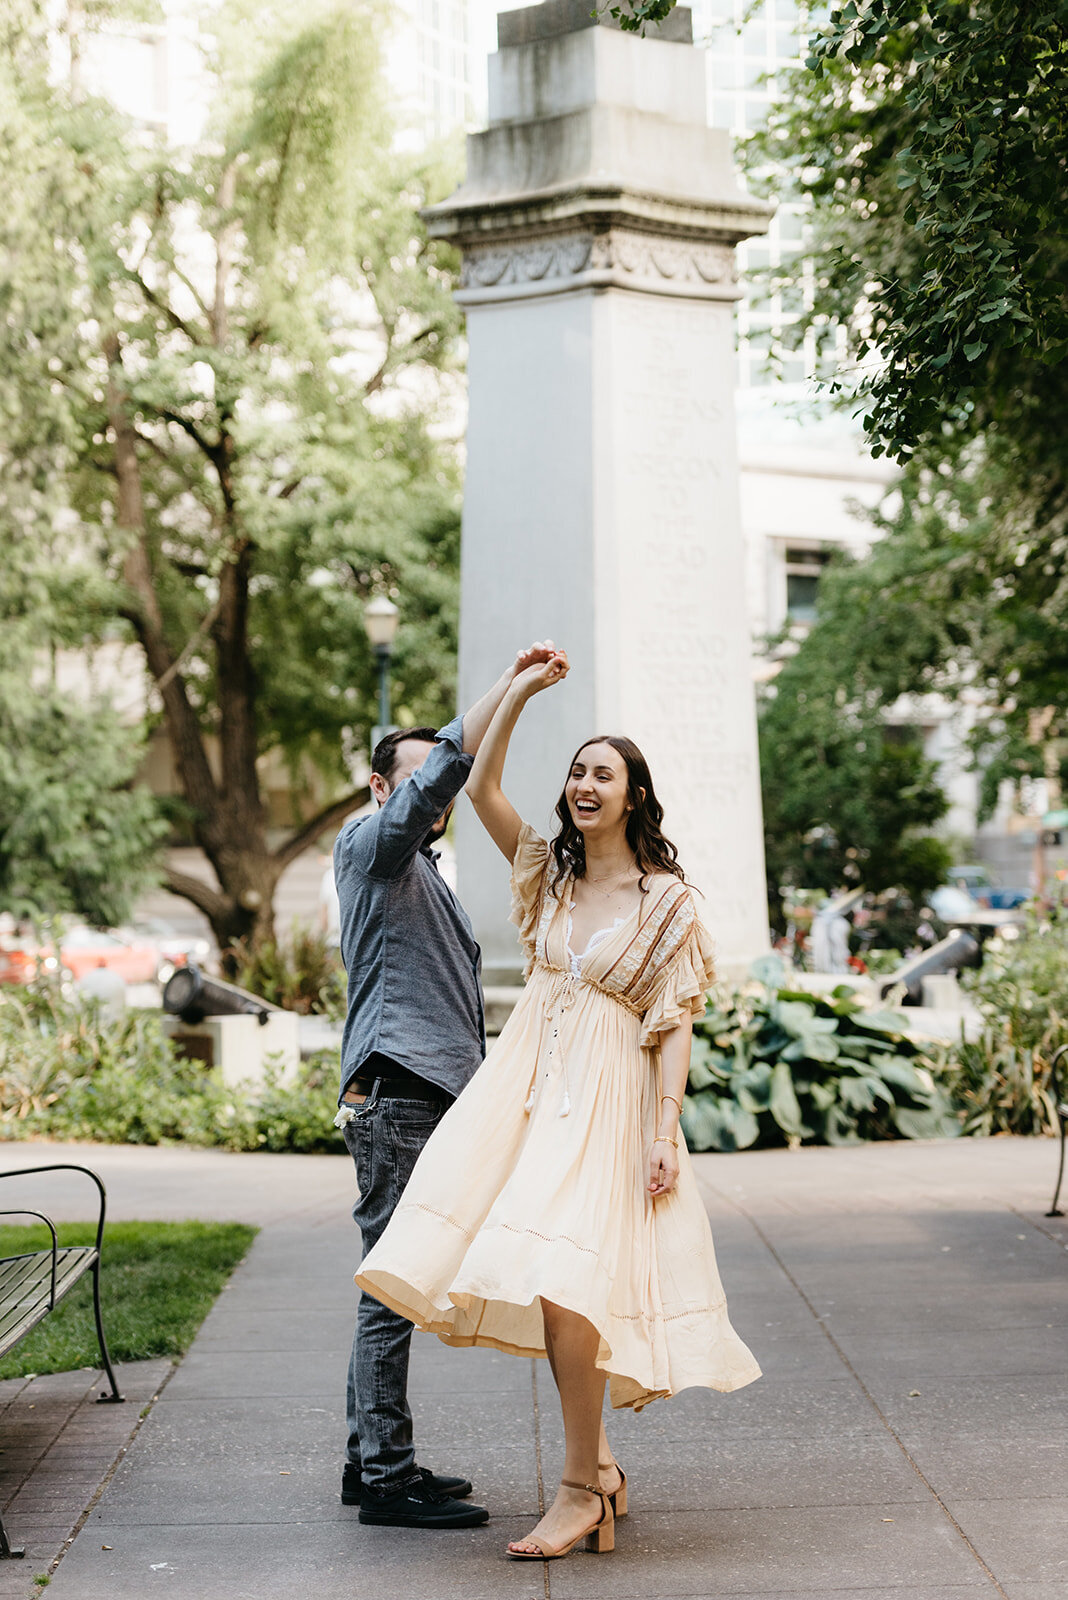 elopement in park by Multnomah county courthouse